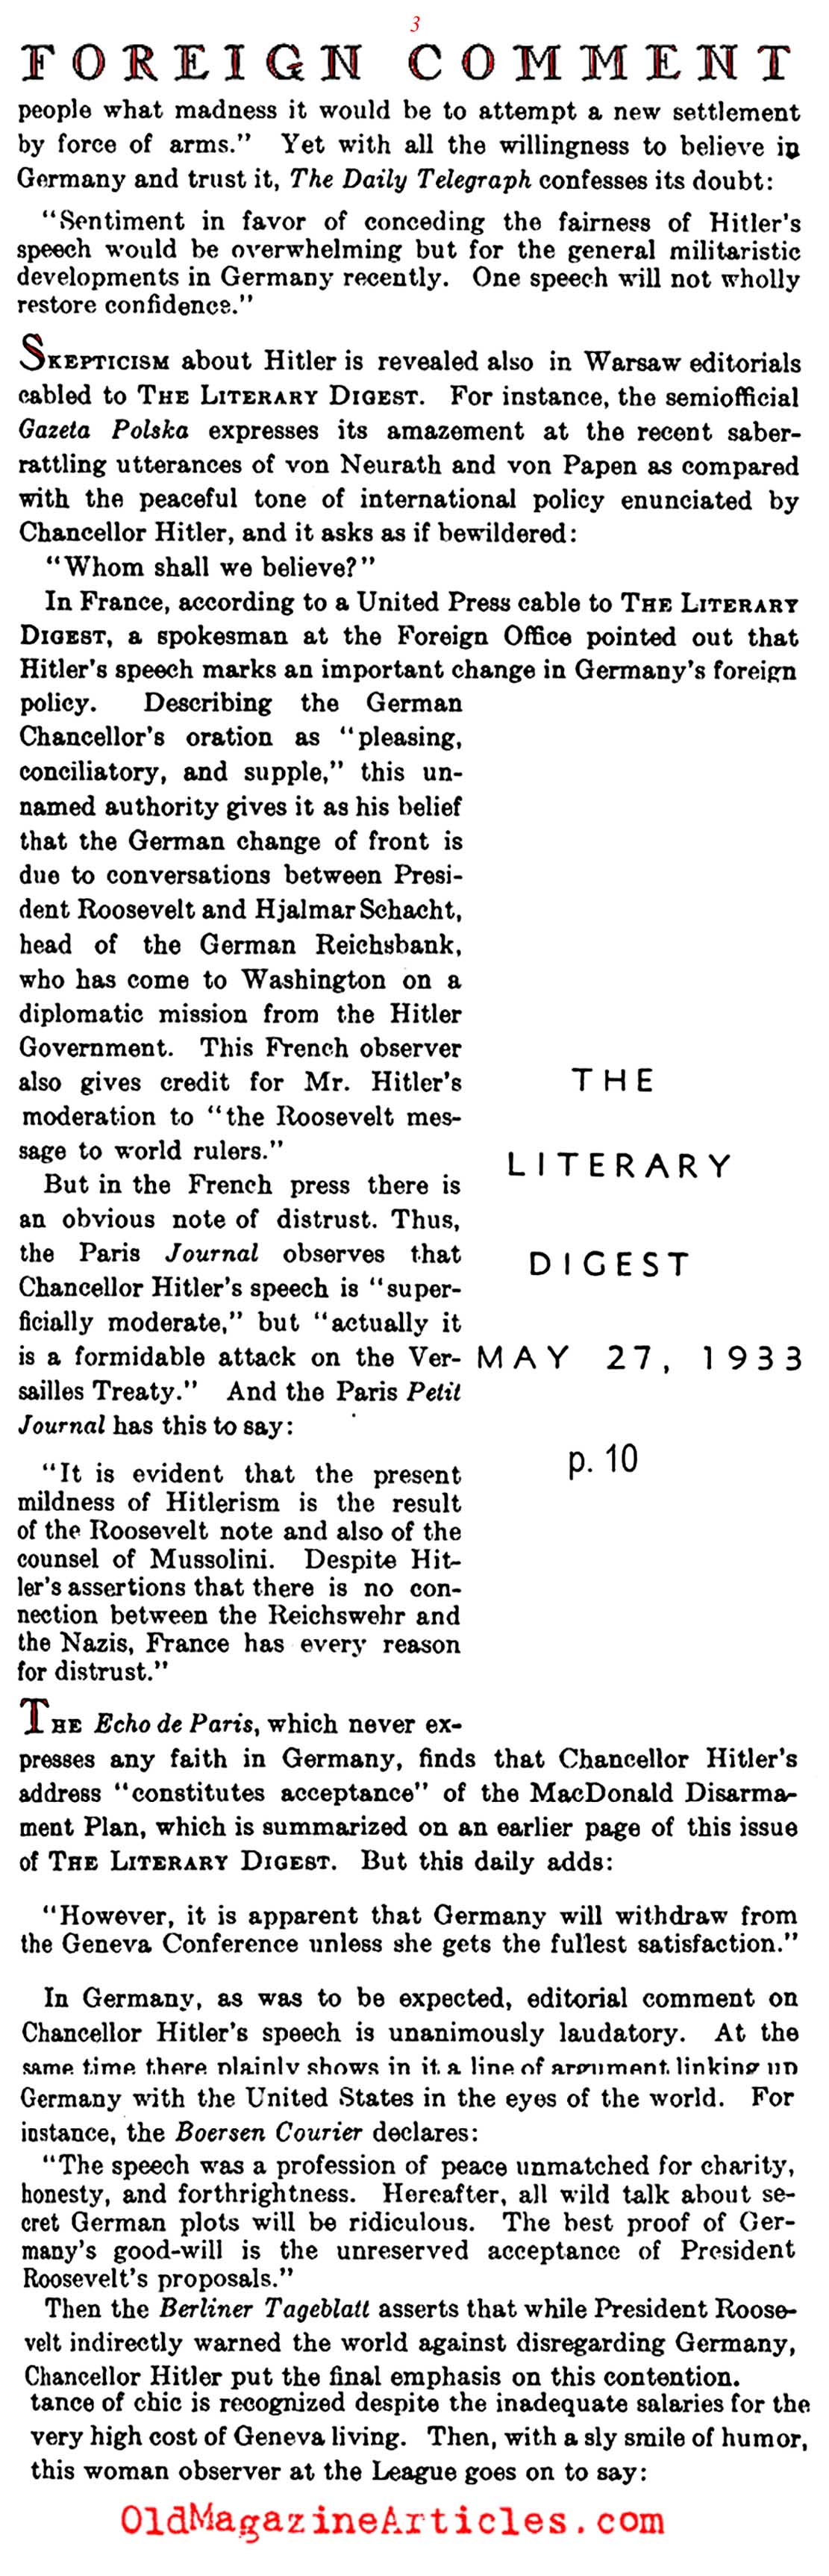 What is Next for Europe? (Literary Digest, 1933)